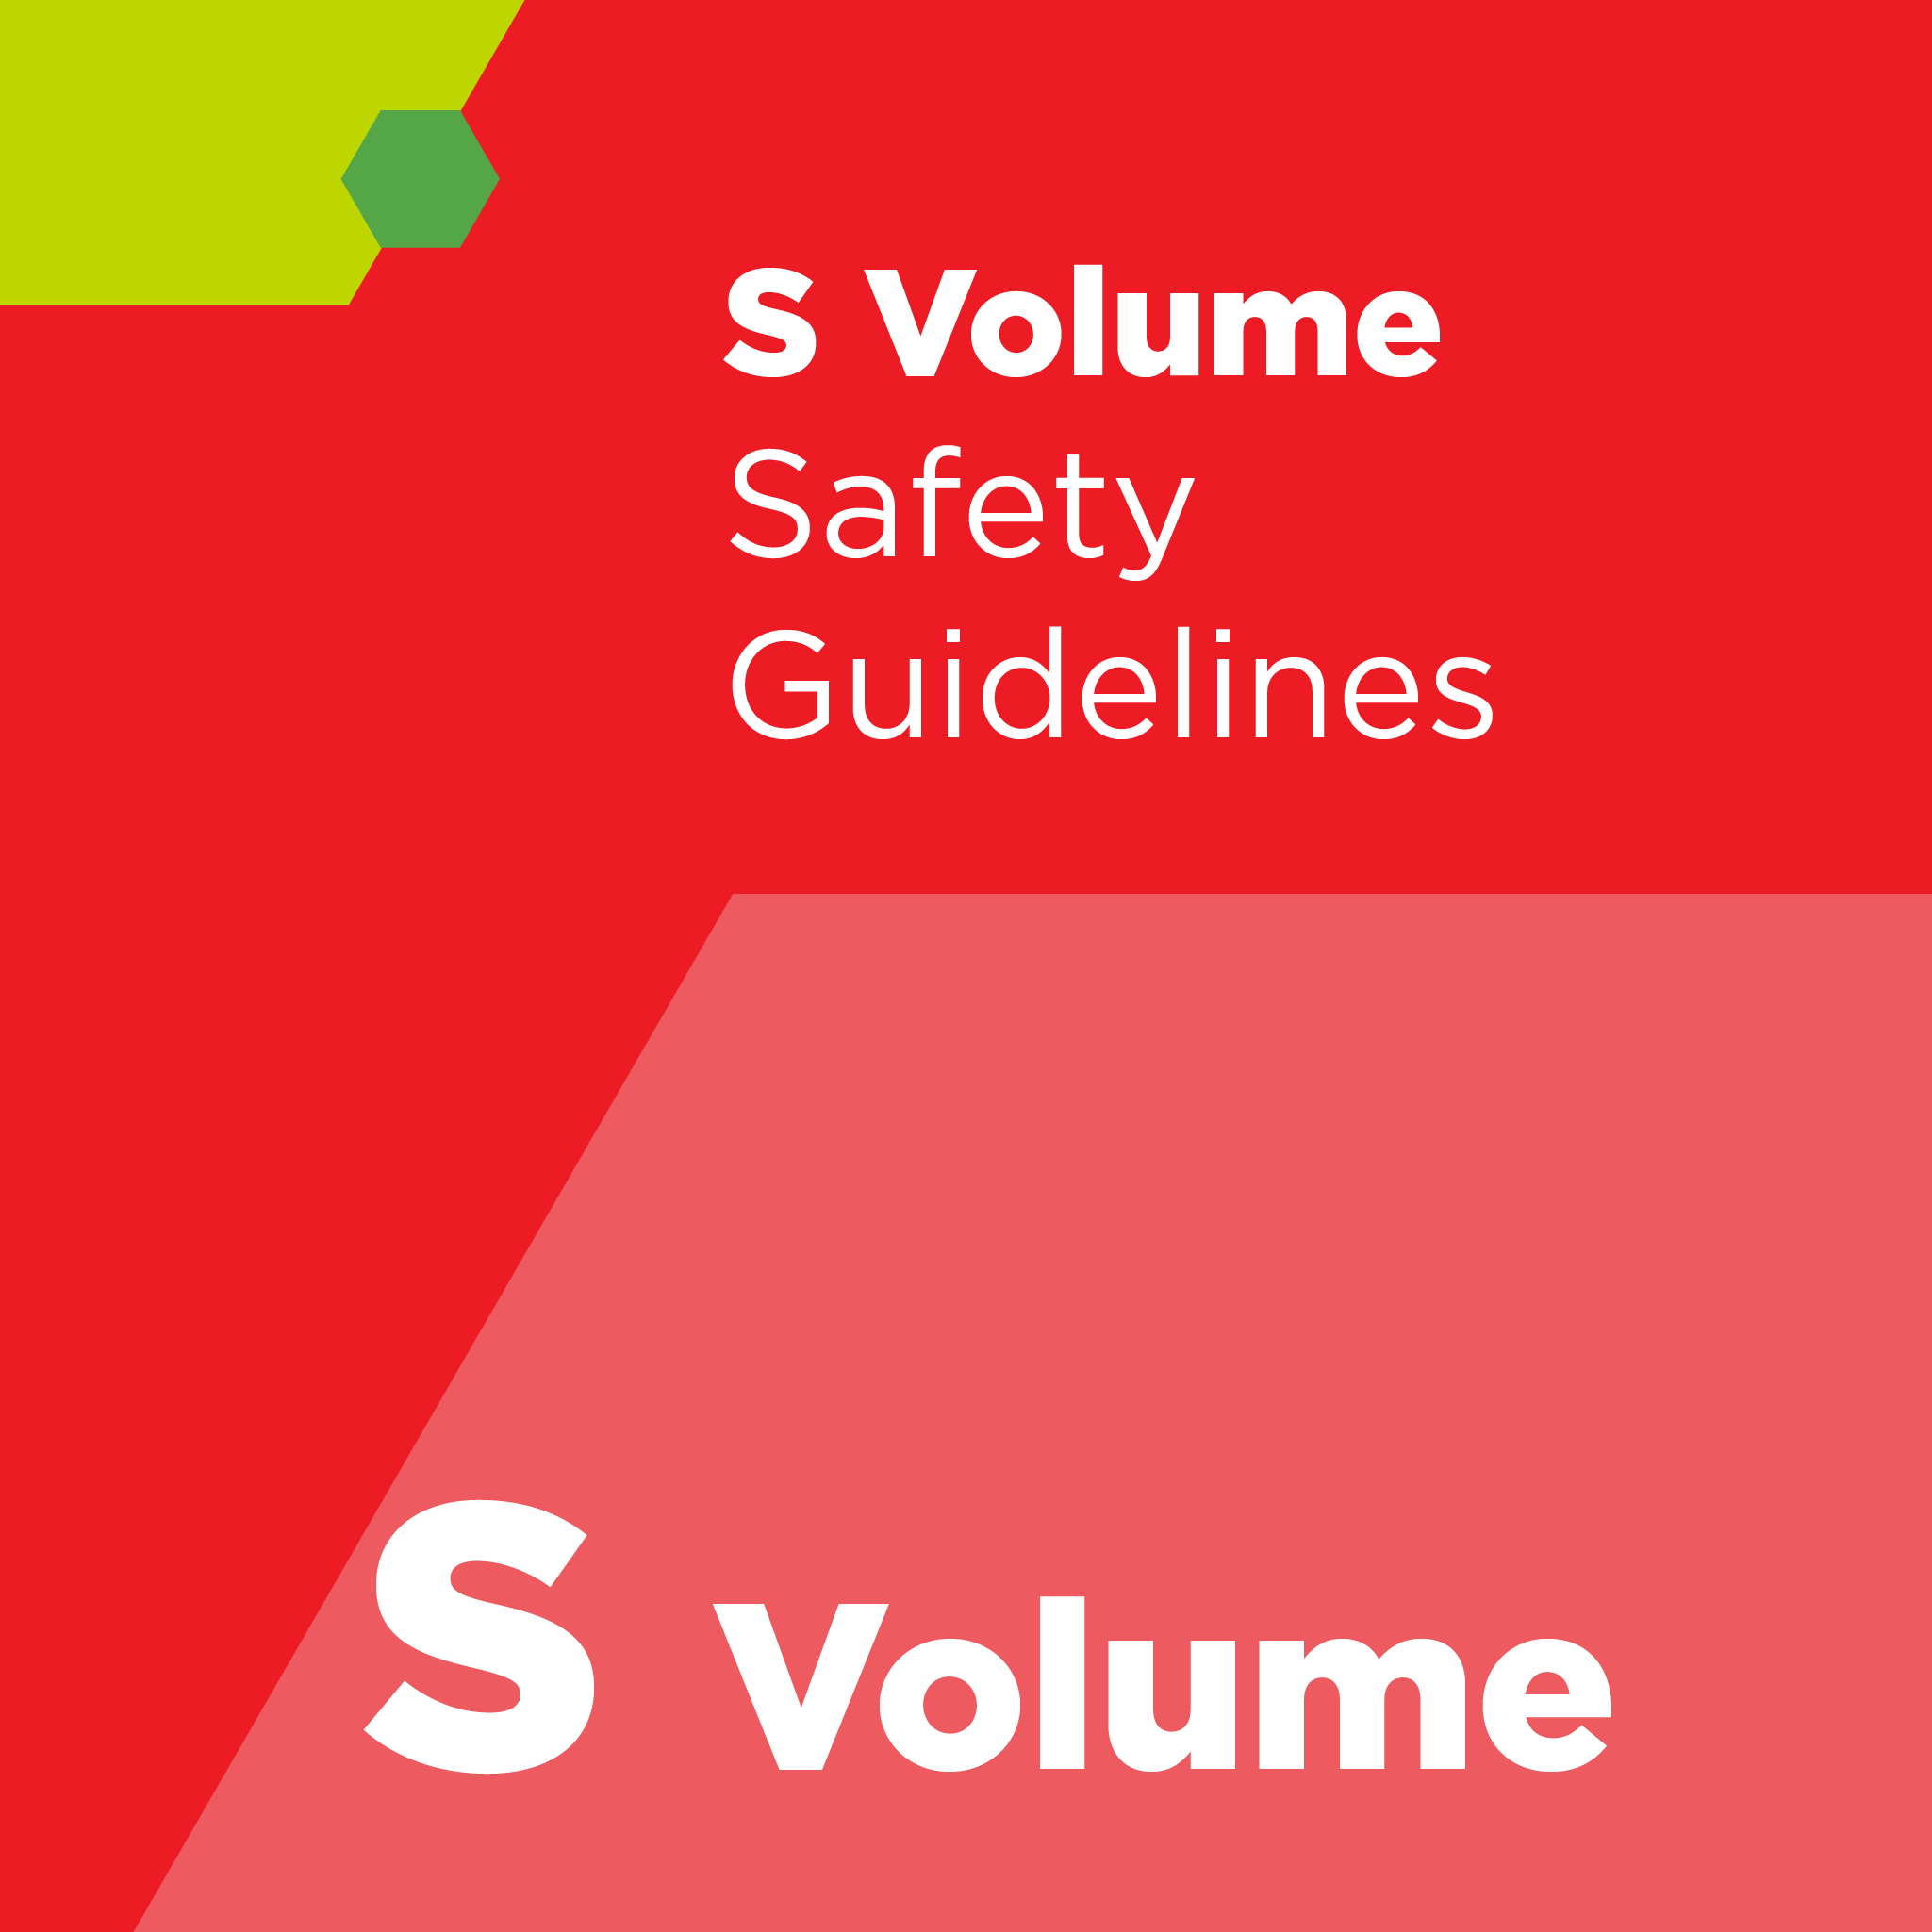 S01300 - SEMI S13 - Environmental, Health and Safety Guideline for Documents Provided to the Equipment User for Use With Manufacturing Equipment